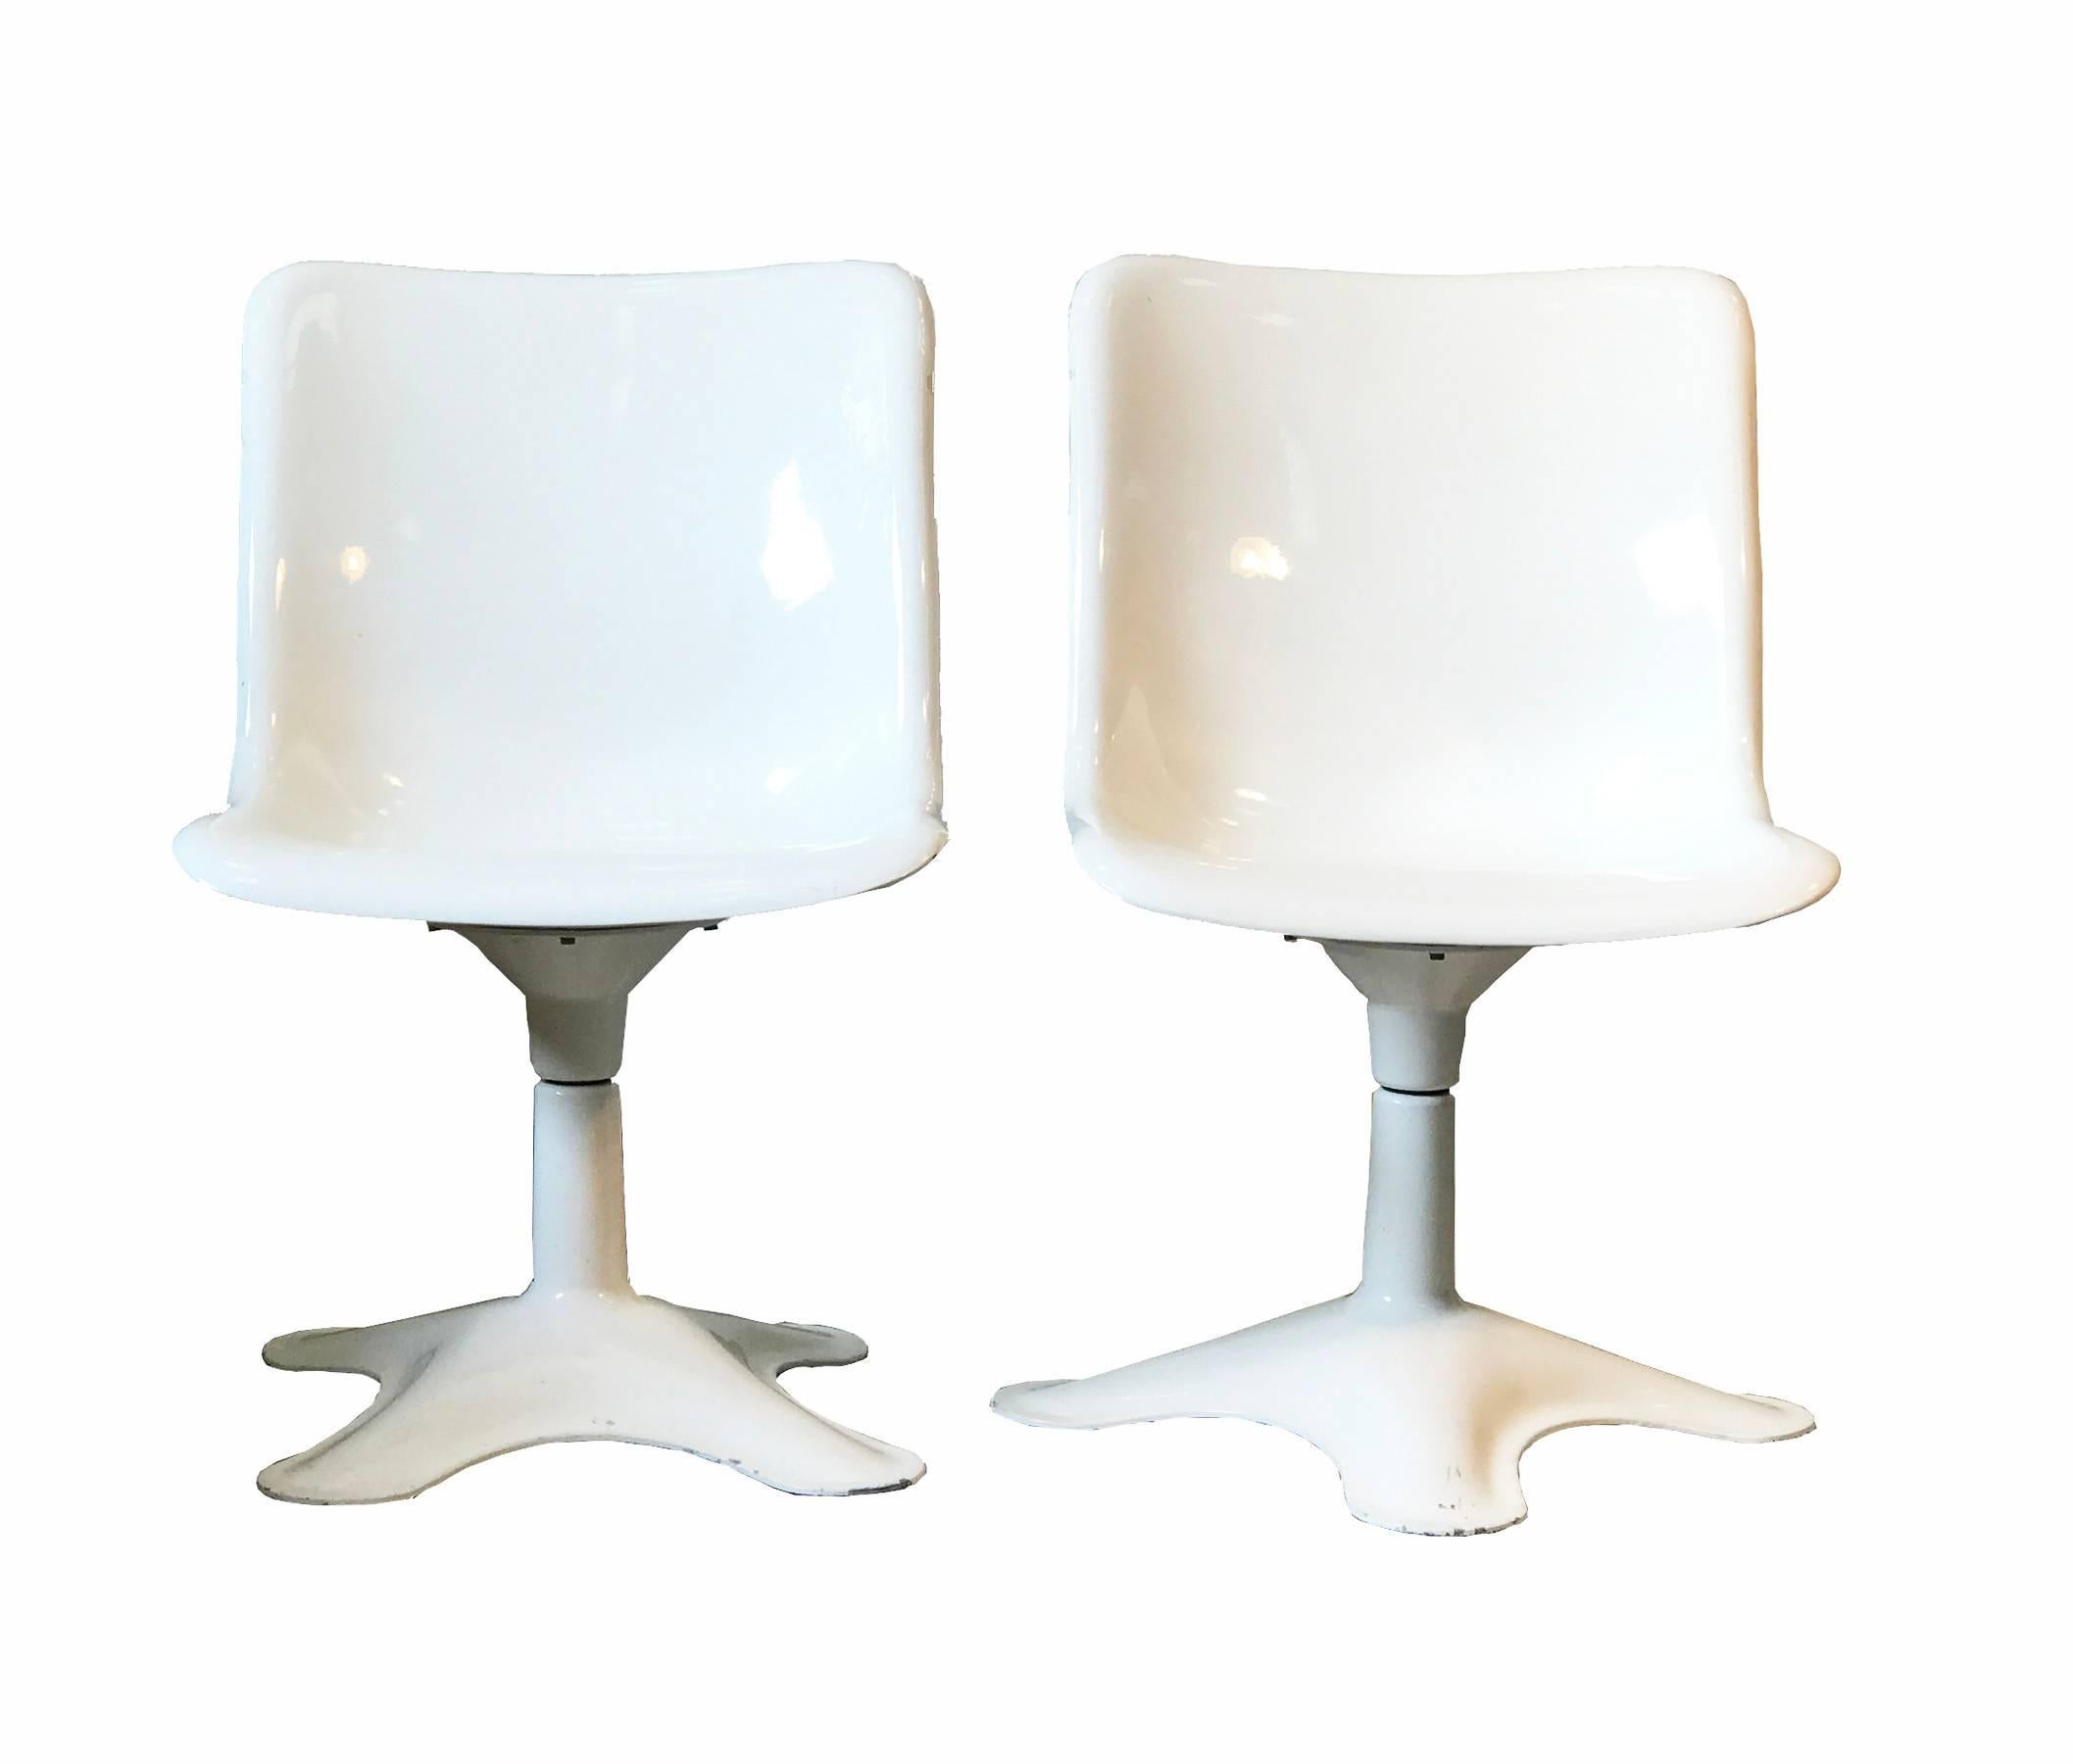 Swivel fiber glass seat and aluminum base chair, designed in the late 1960s by Yrjö Kukkapuro for Haimi.
These chairs are no longer in production, there are no re-editions nor copies.

 